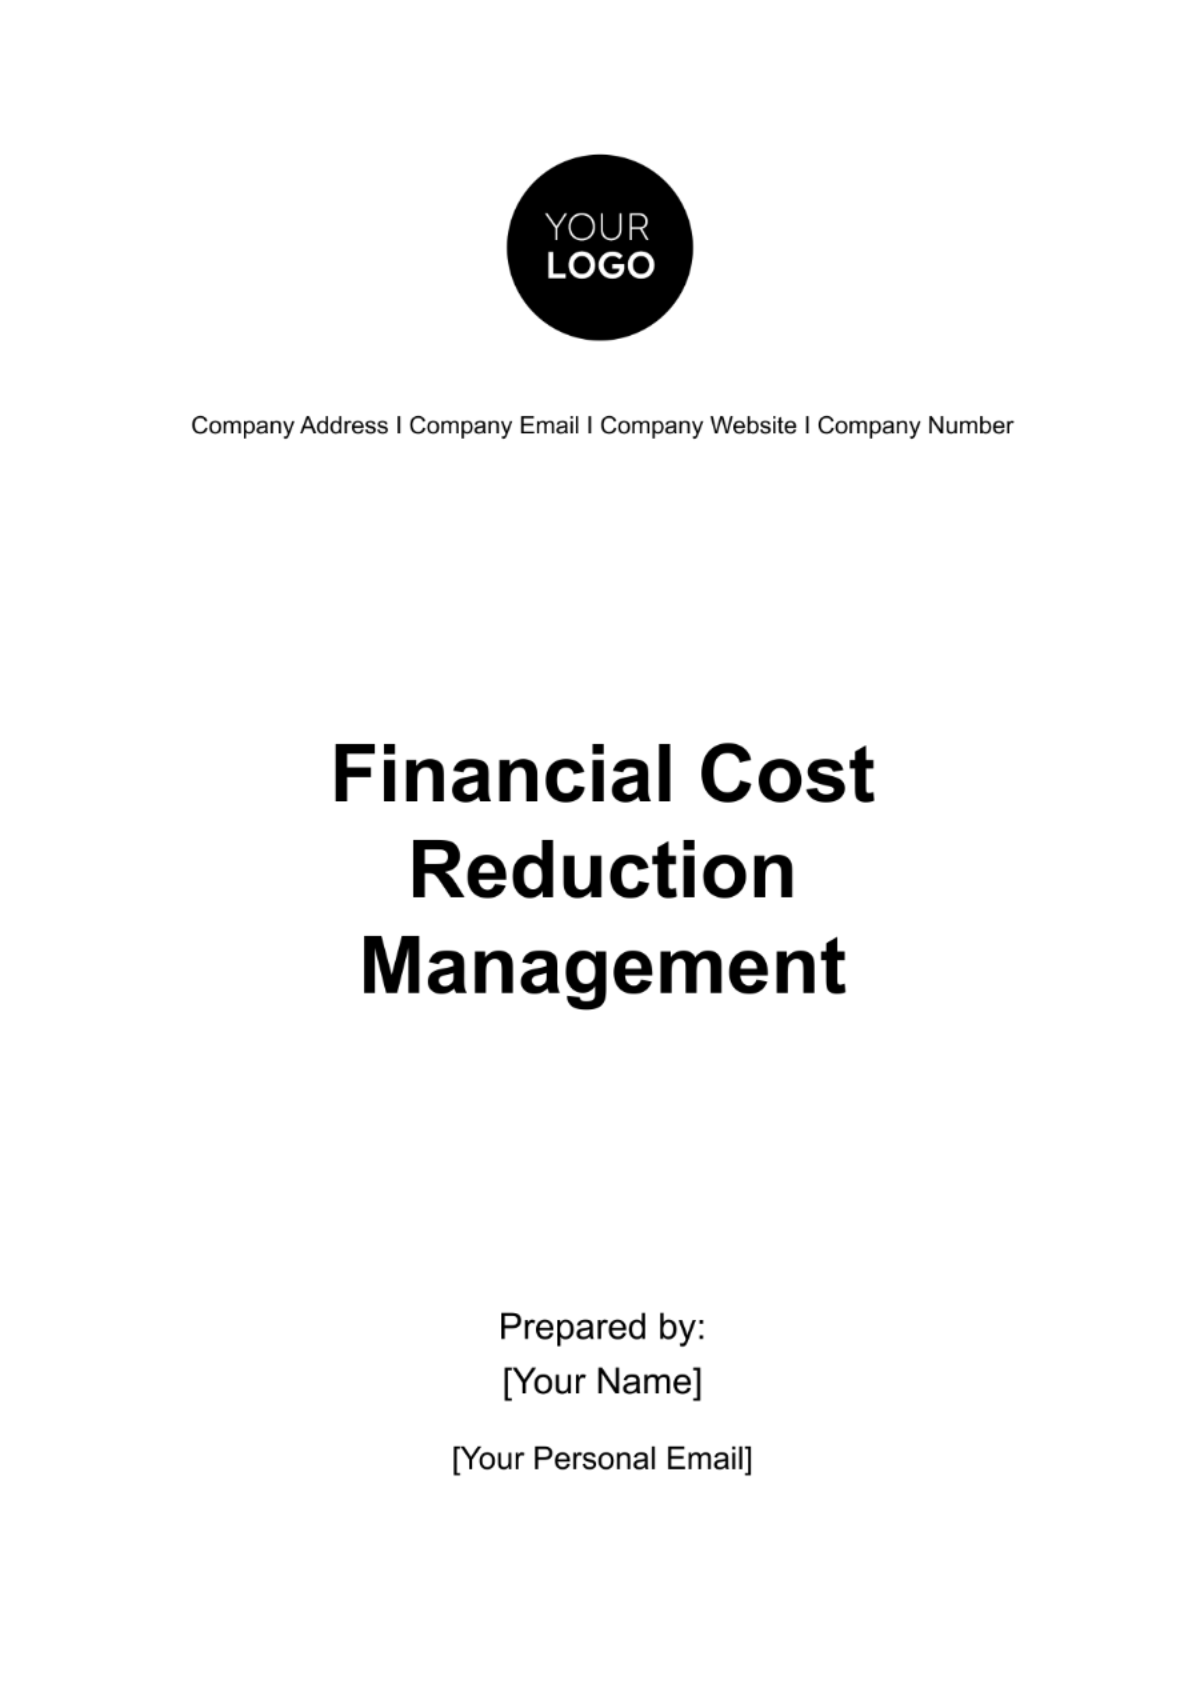 Free Financial Cost Reduction Management Template